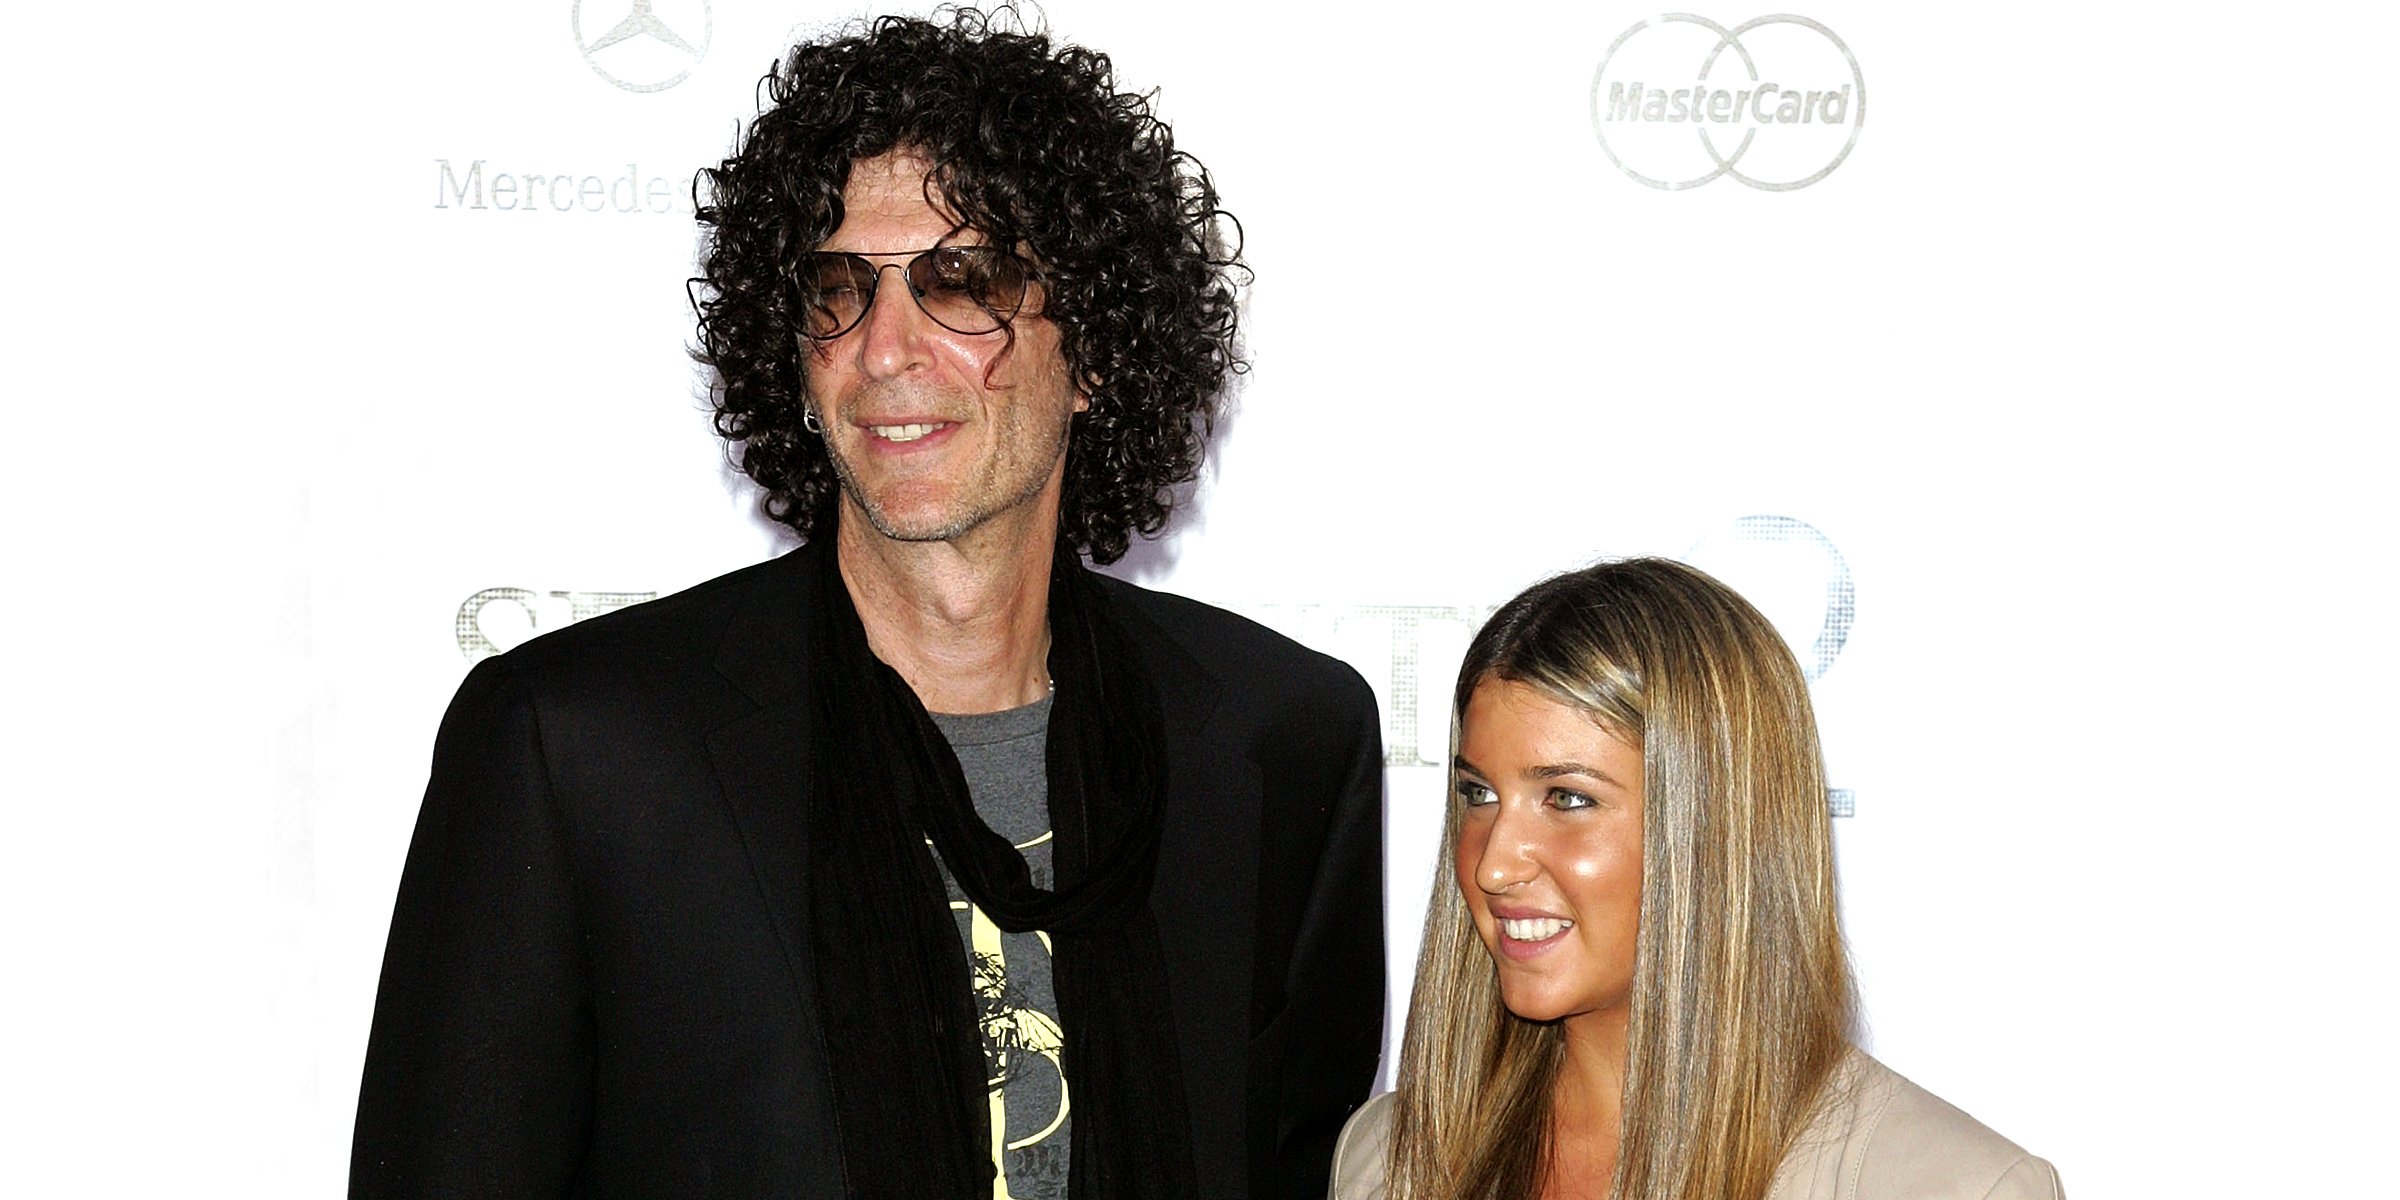 Howard and Ashley Jade Stern | Source: Getty Images